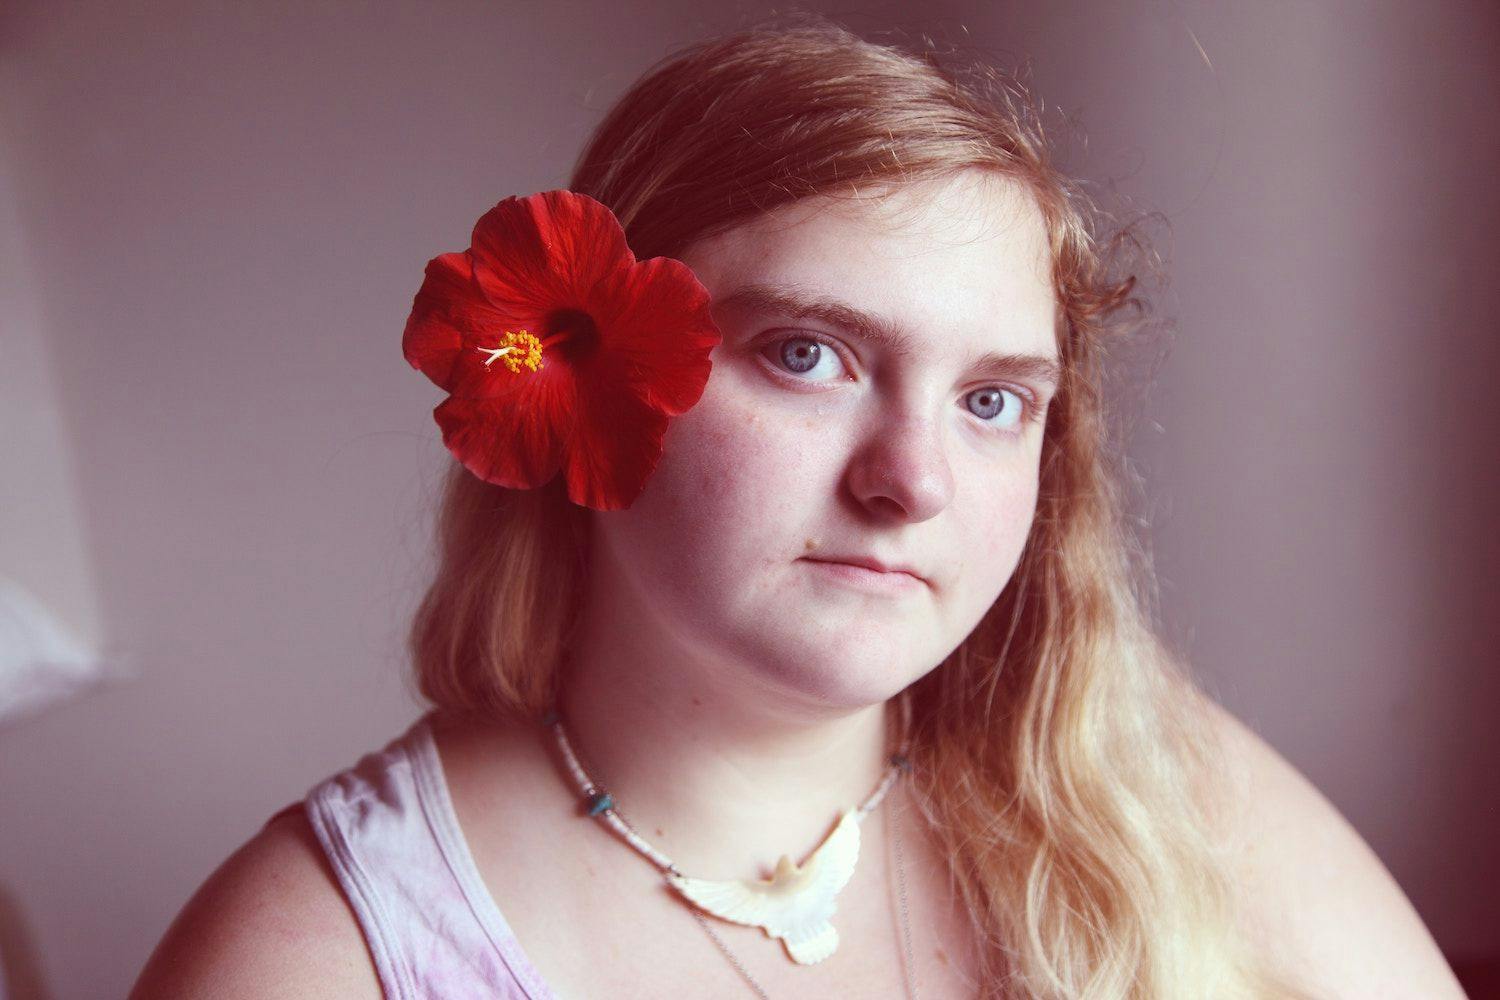 Person looking distantly into camera with a straight face.They have a red flower in their hair. 